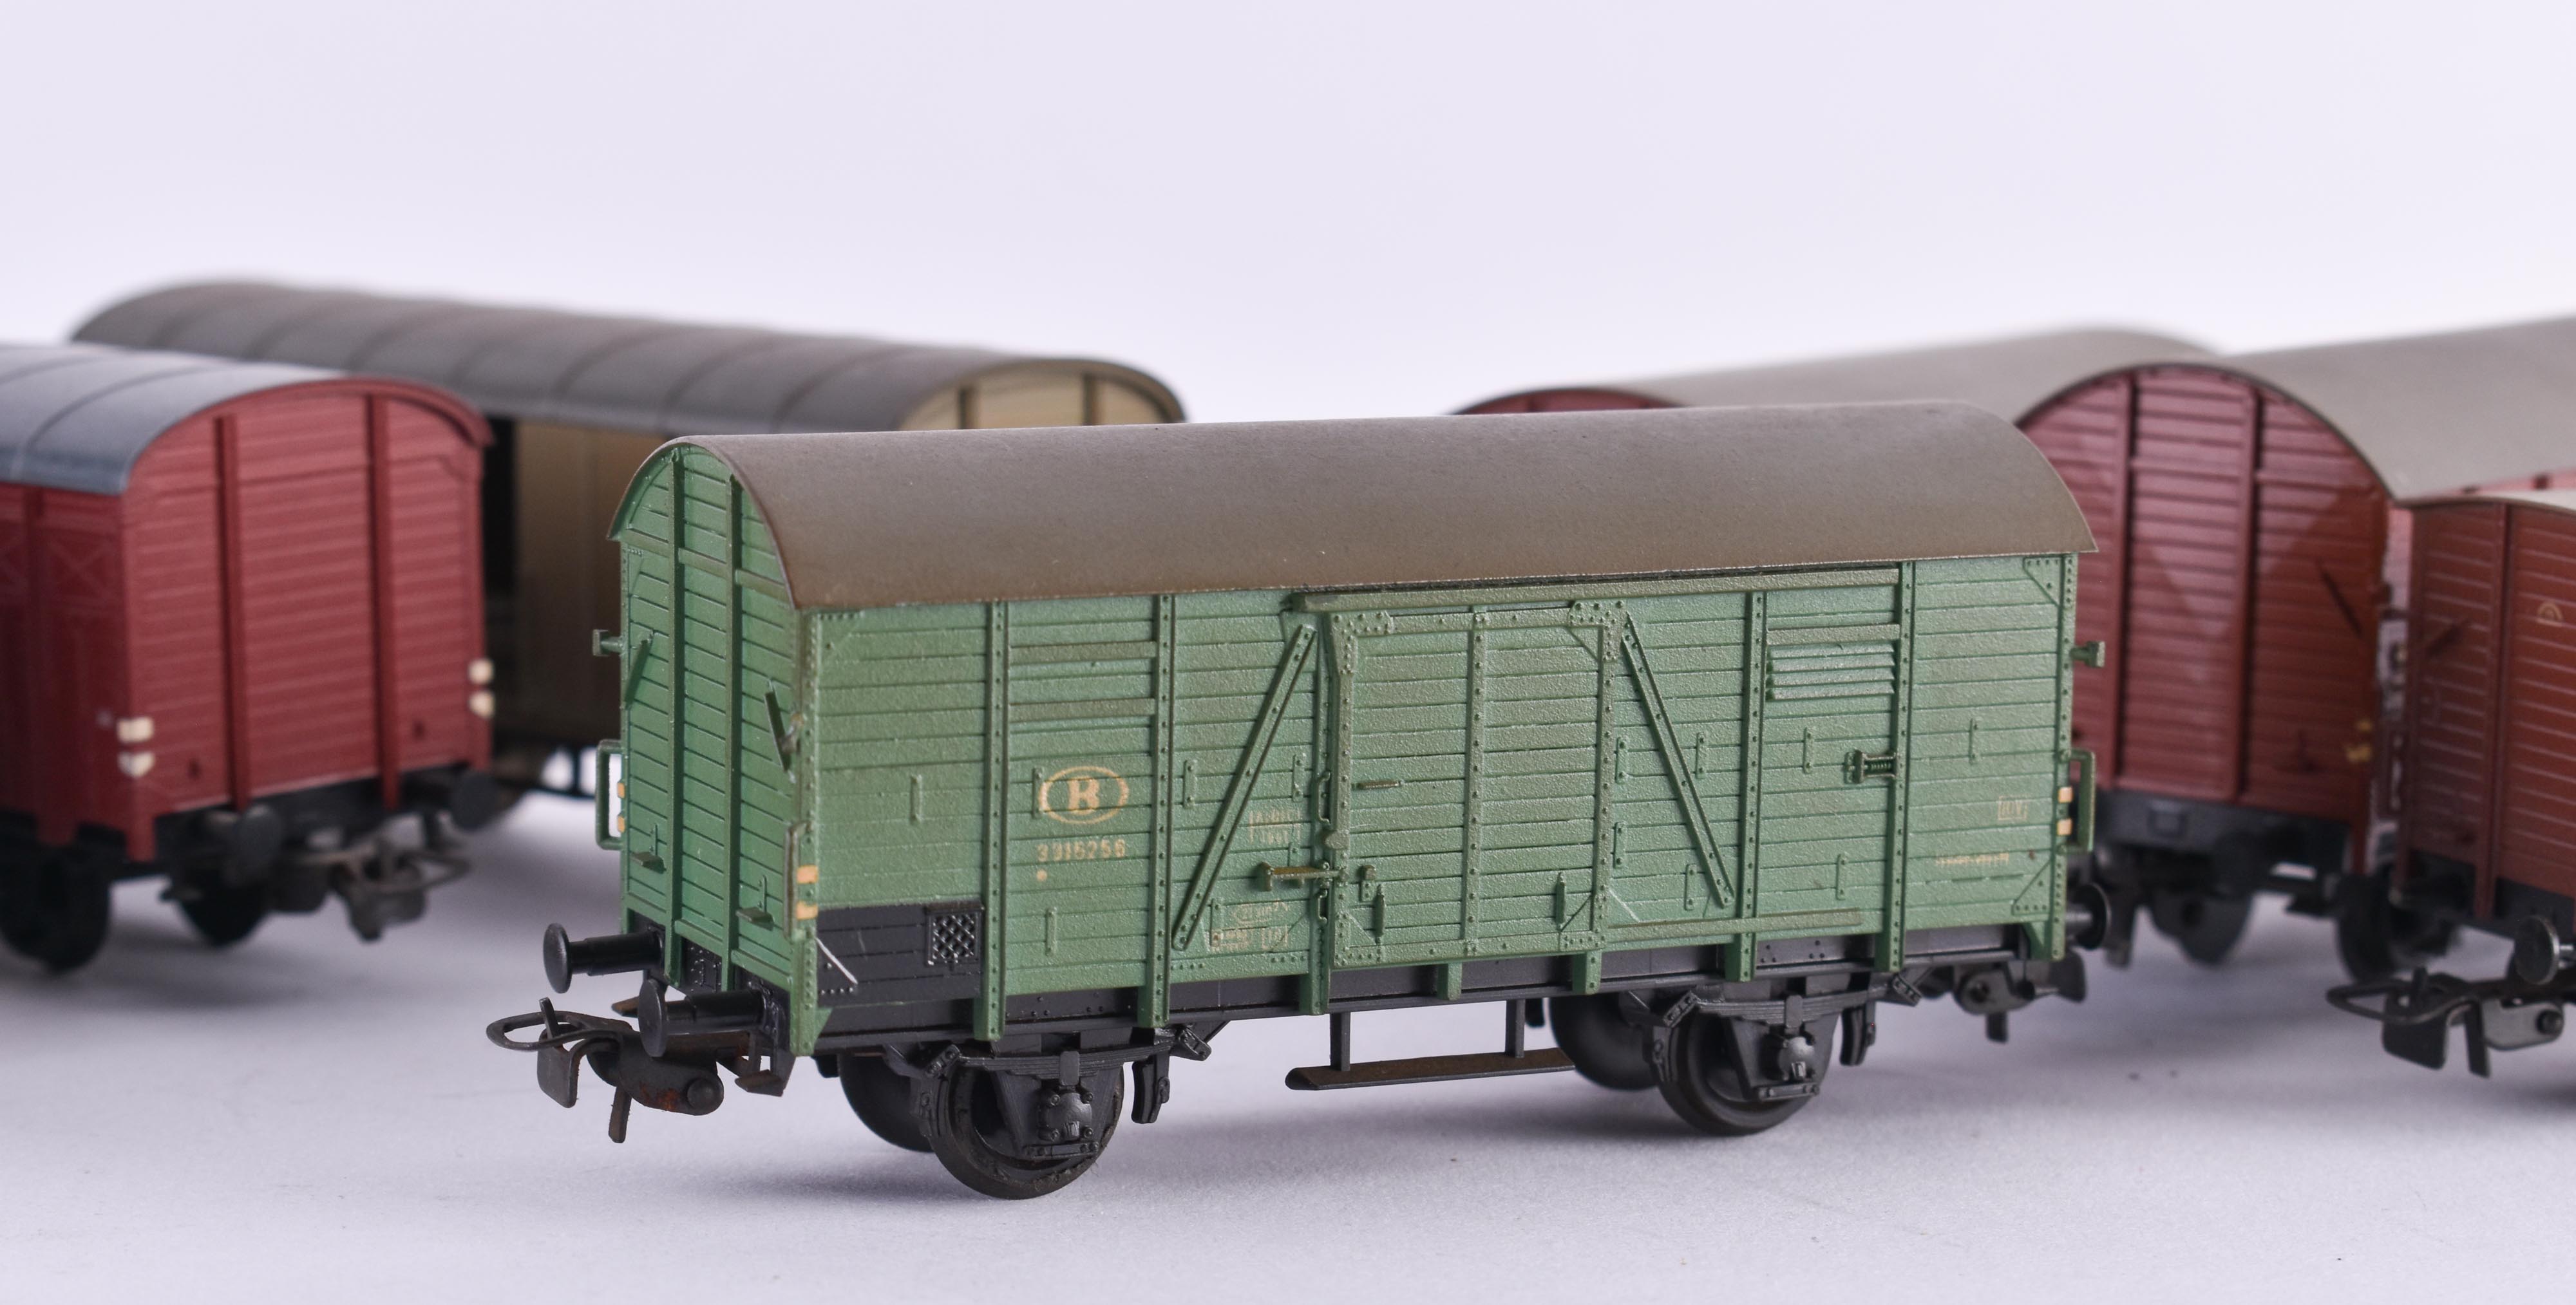 4 goods wagons 46120 and 4 goods wagons 3315256 Piko - Image 2 of 3